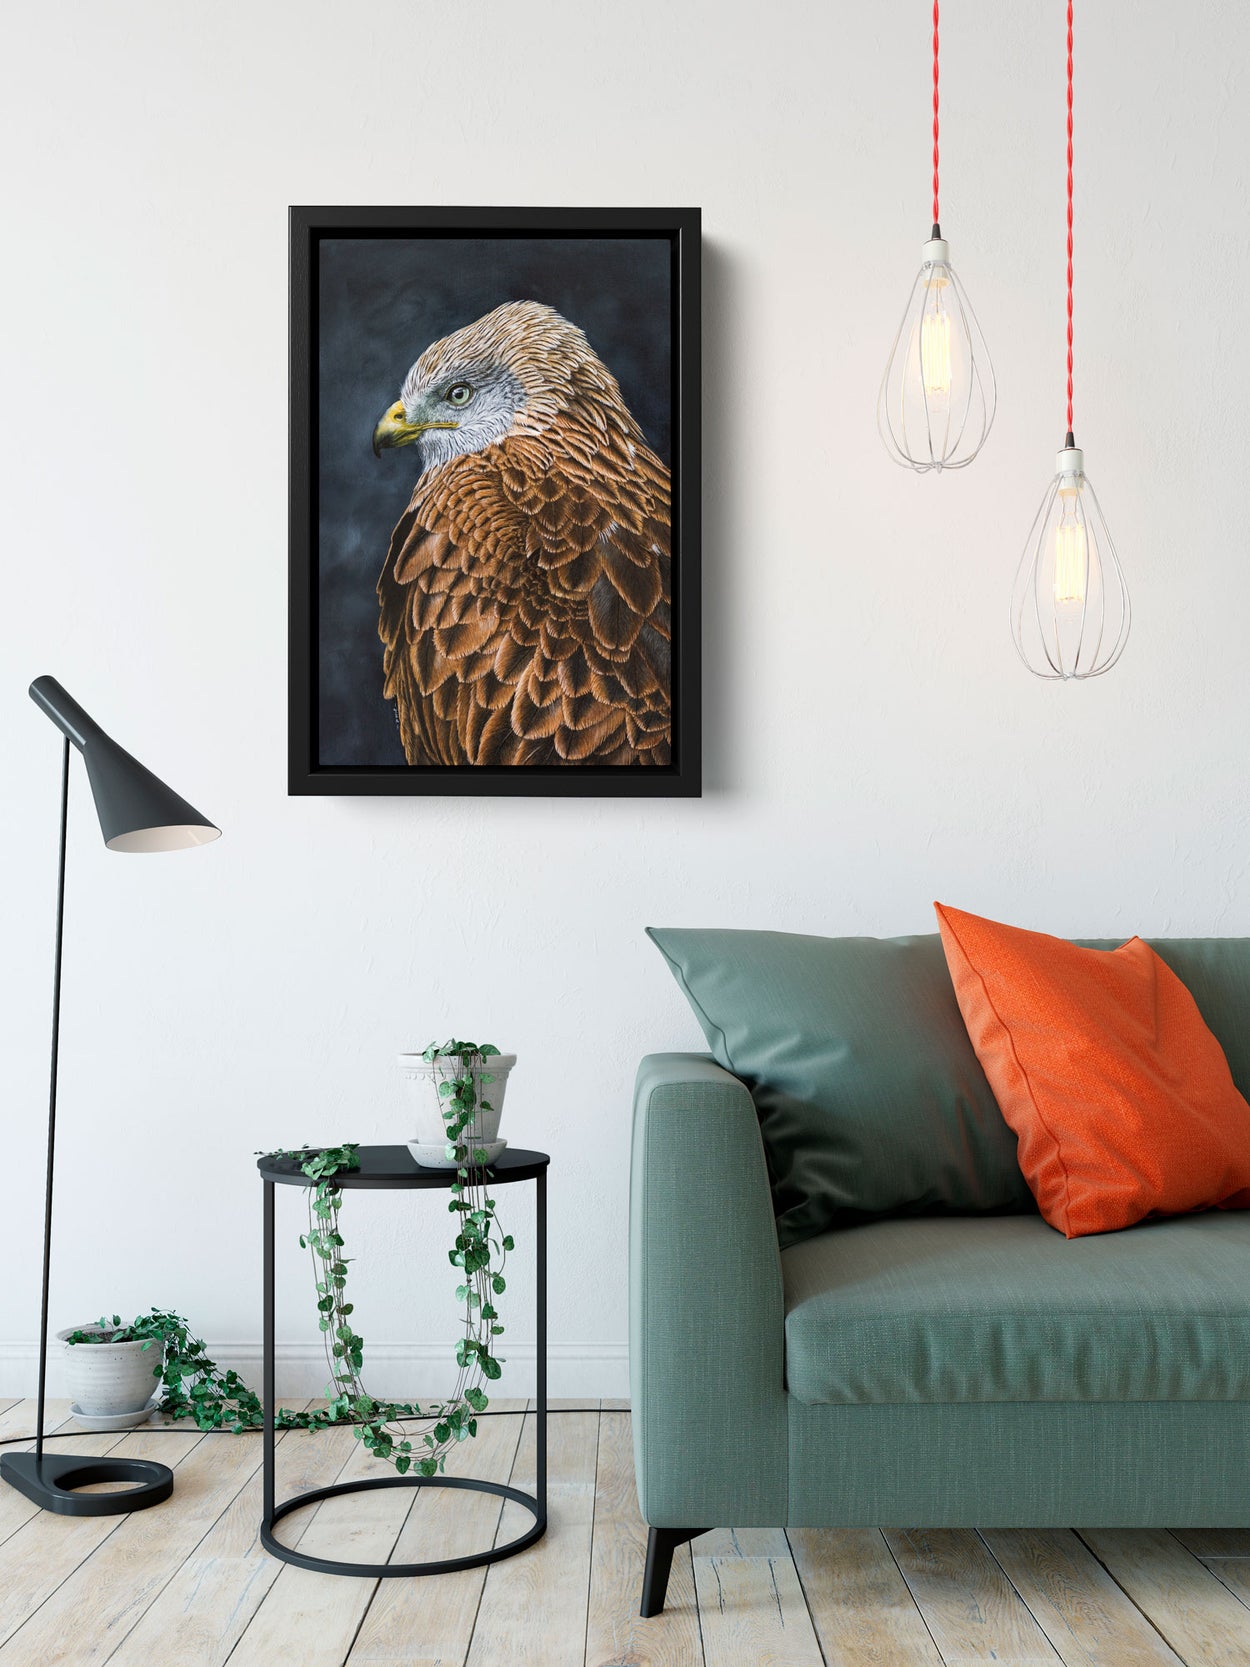 Red Kite Painting on Wall by Jill Dimond - The Thriving Wild